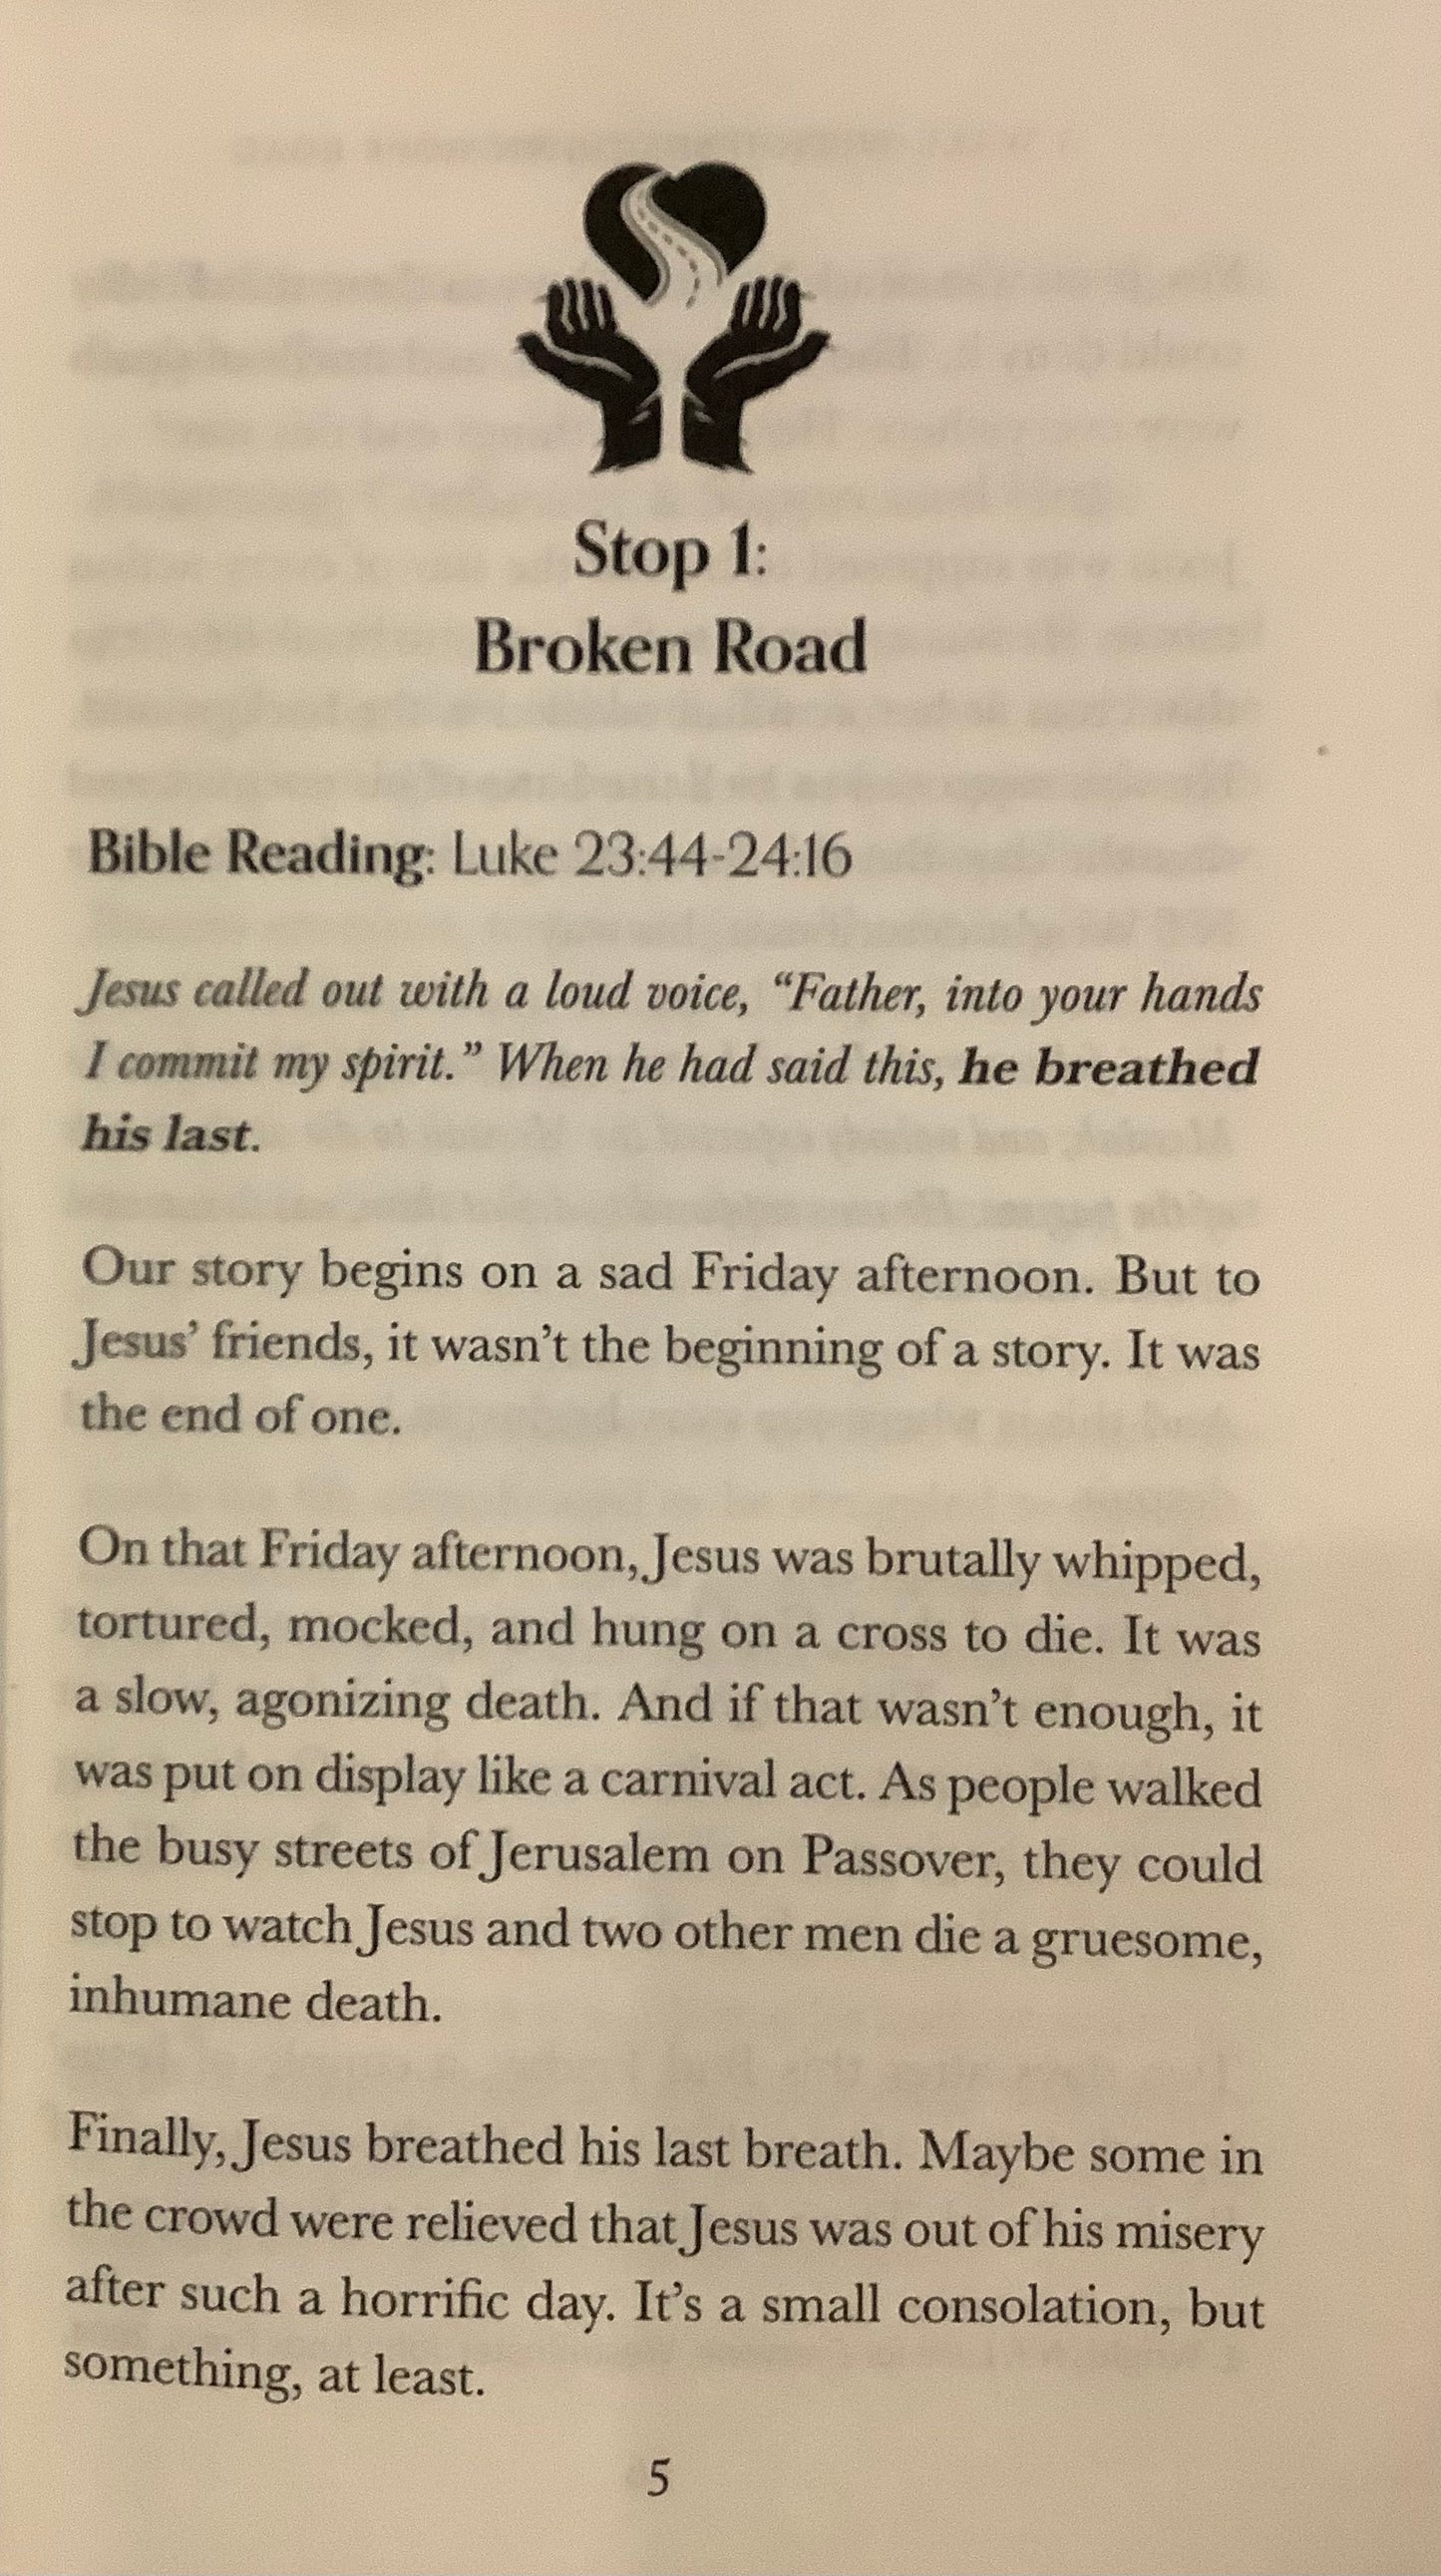 A Walk With Jesus Down Hope Road: Traveling From Brokenness to Hope on the Road to Emmaus